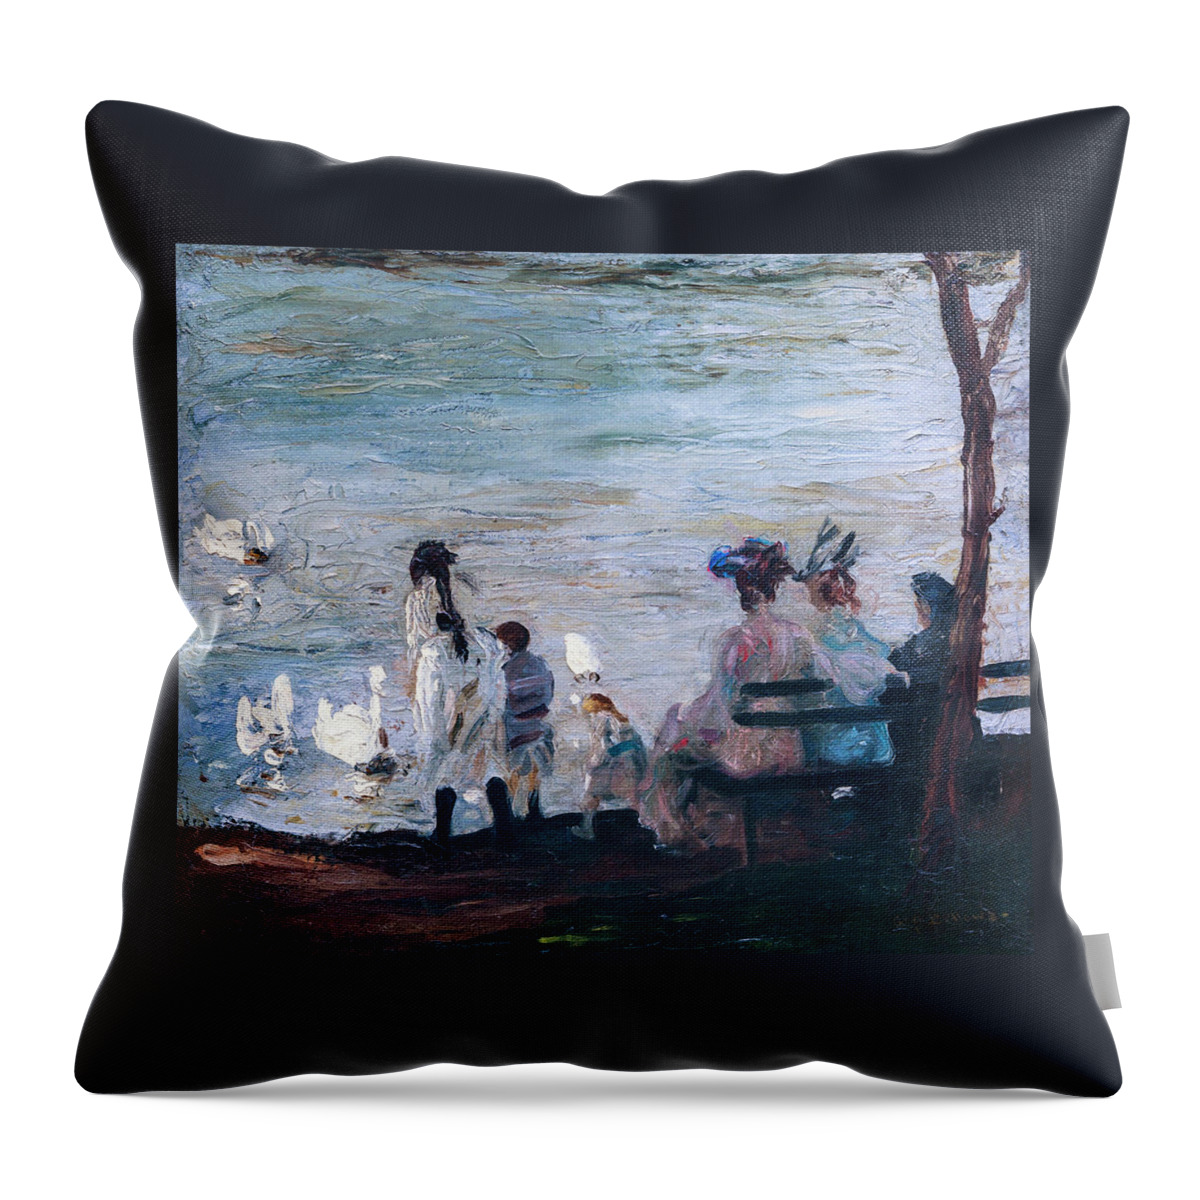 Swans In Central Park Throw Pillow featuring the painting Swans in Central Park by George Bellows July 1906 by George Bellows